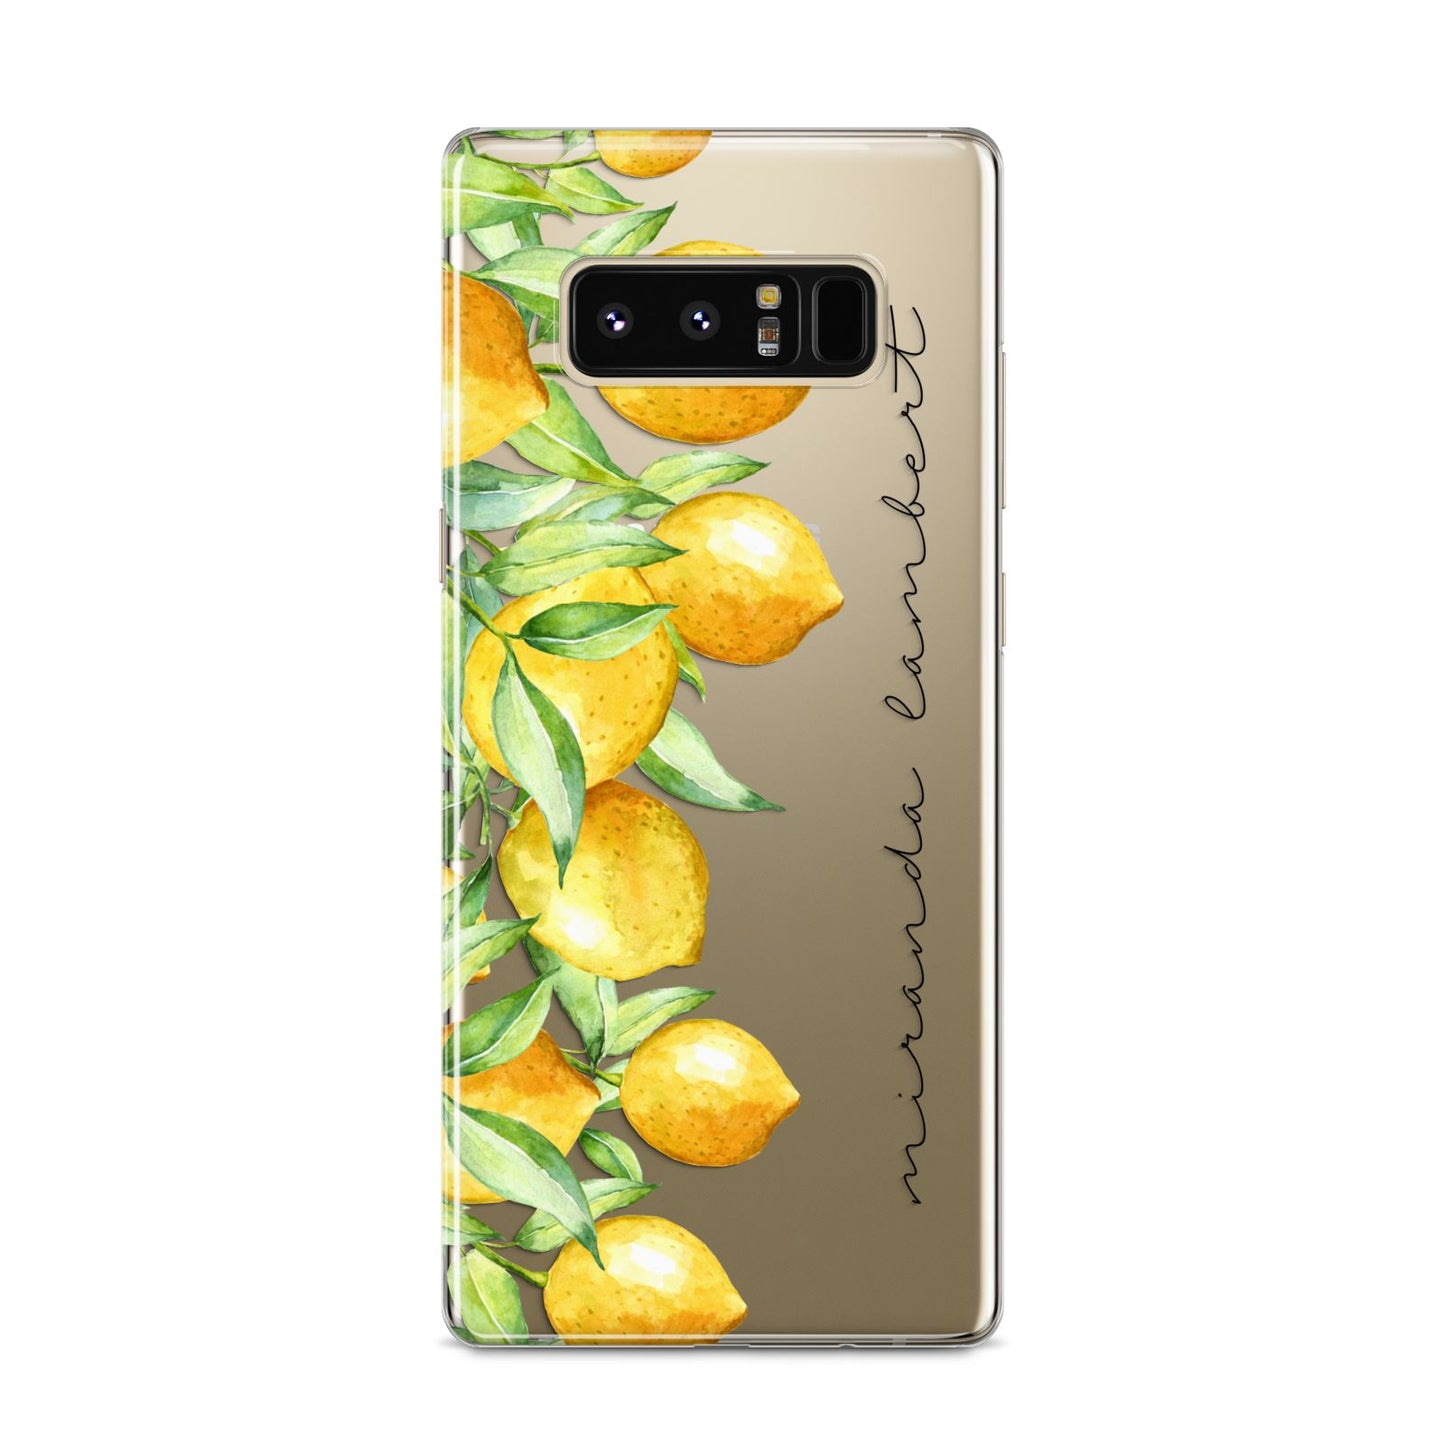 Personalised Lemon Bunches Samsung Galaxy S8 Case